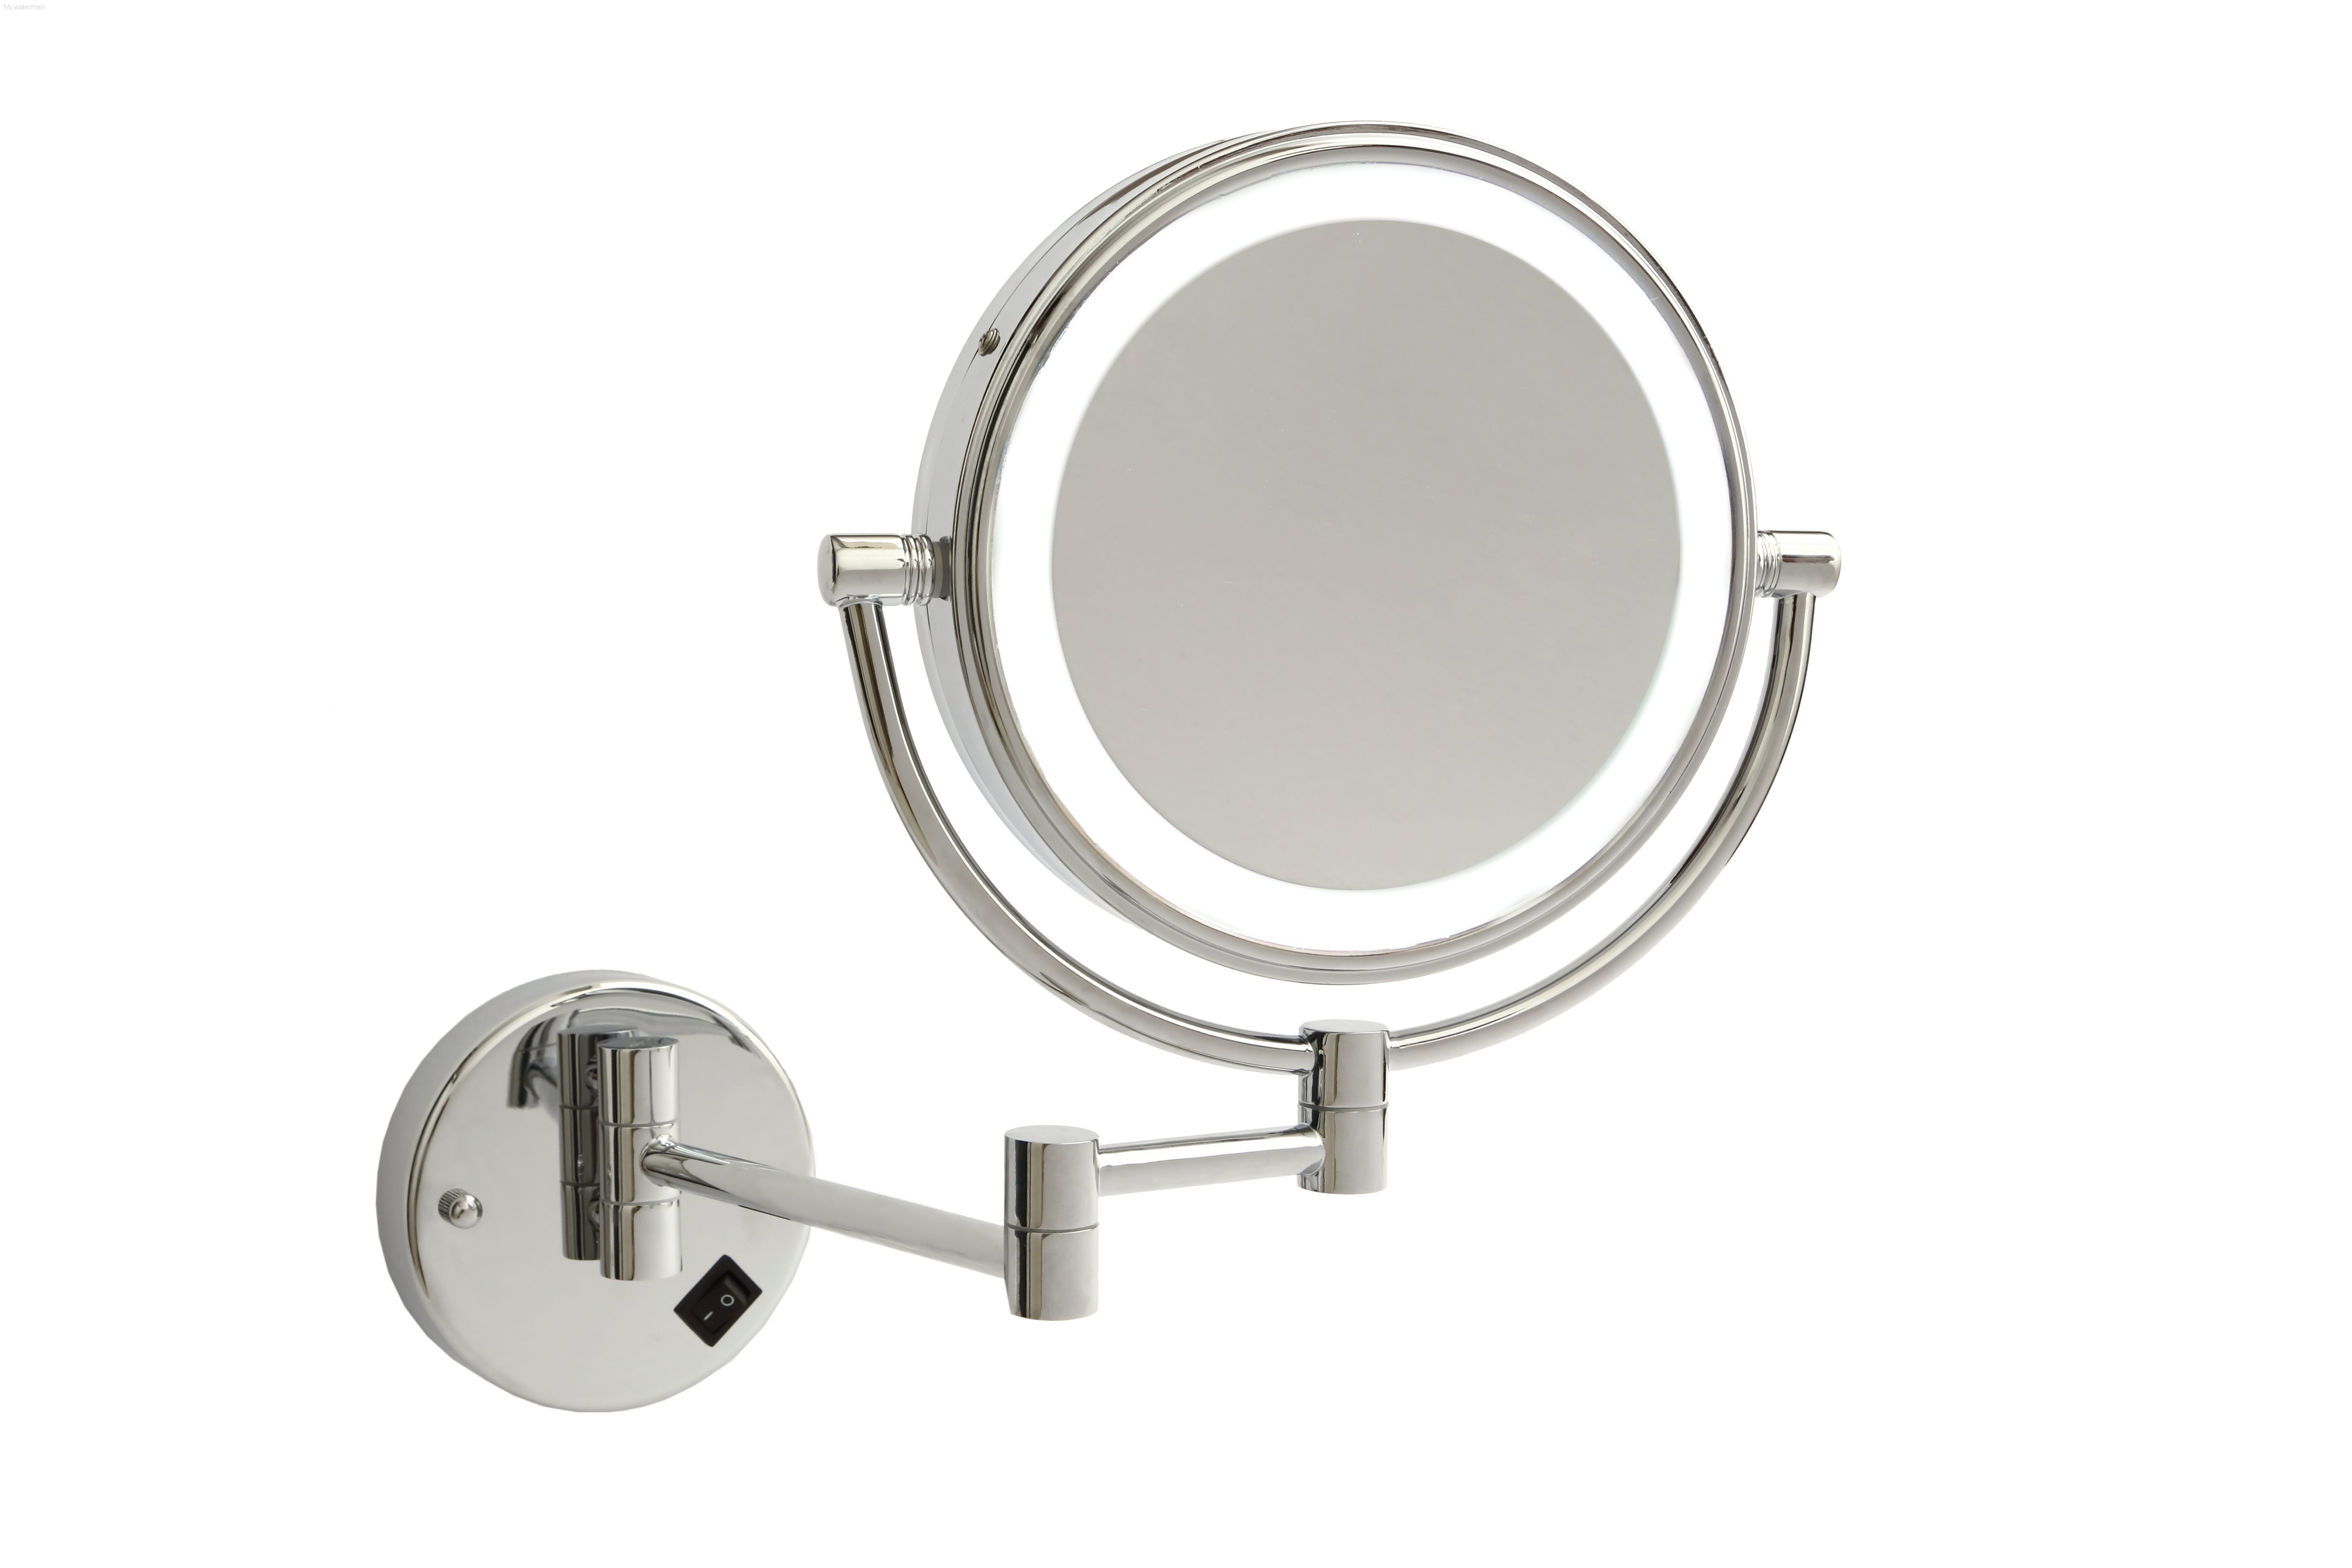 Ablaze 1 & 8x Magnification Chrome Wall Mounted Shaving Mirror, 200mm Diameter with Concealed Wiring